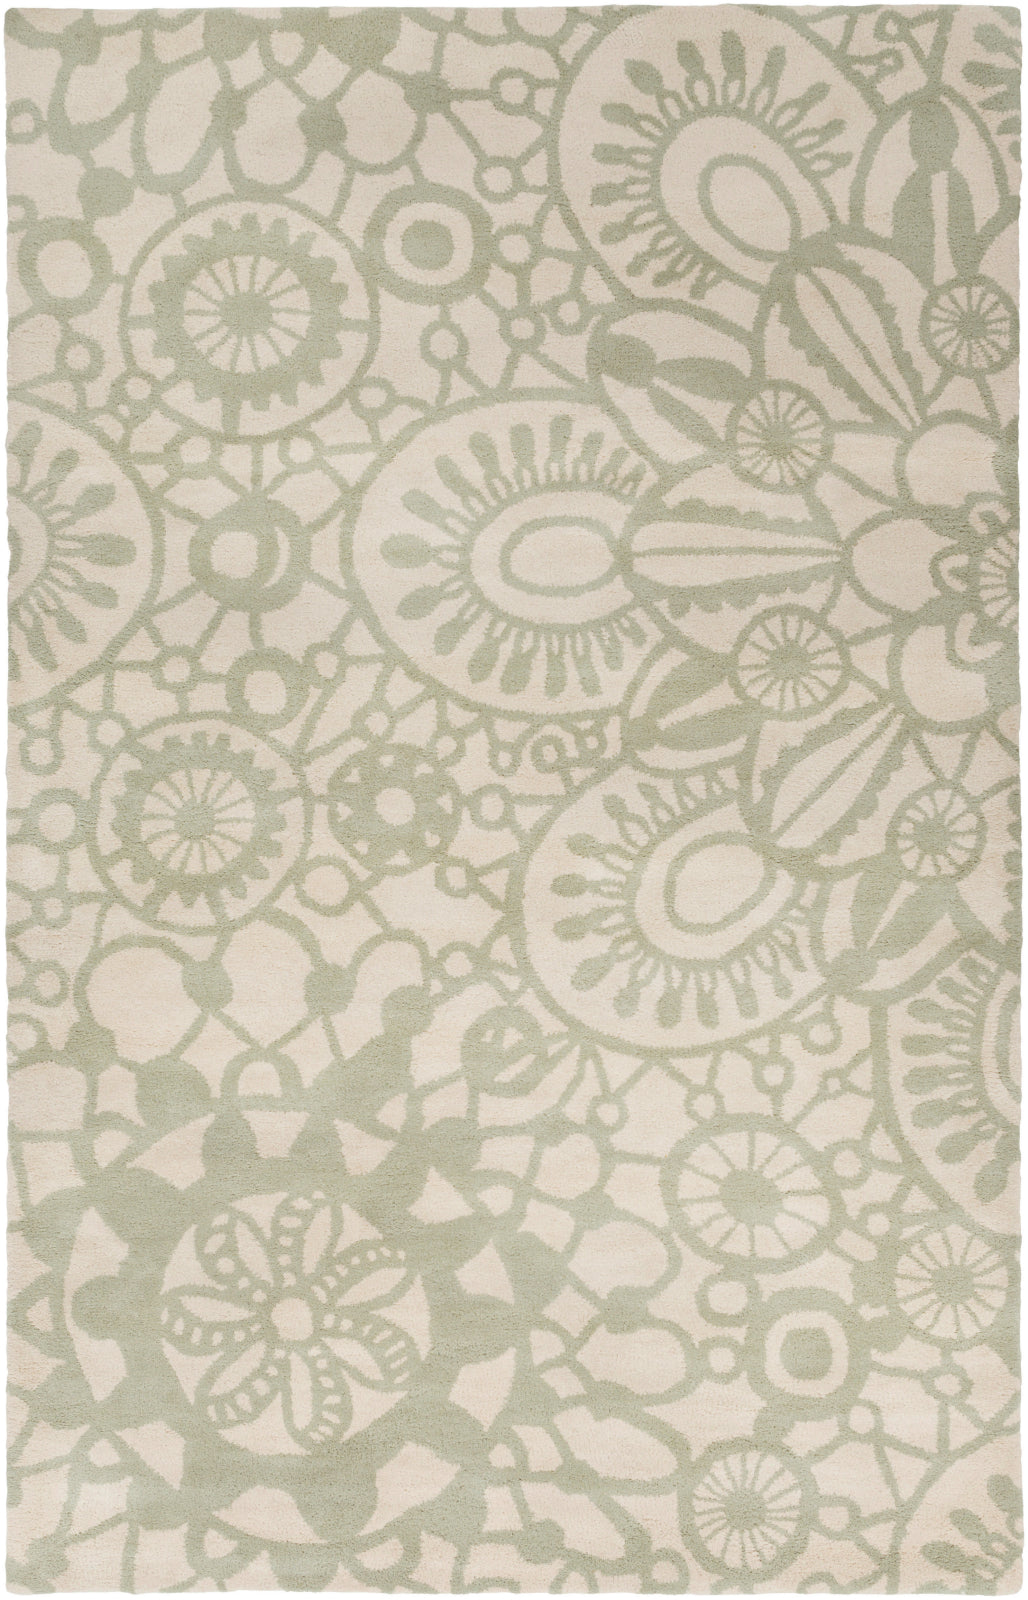 Surya Alhambra ALH-5026 Area Rug by Kate Spain main image